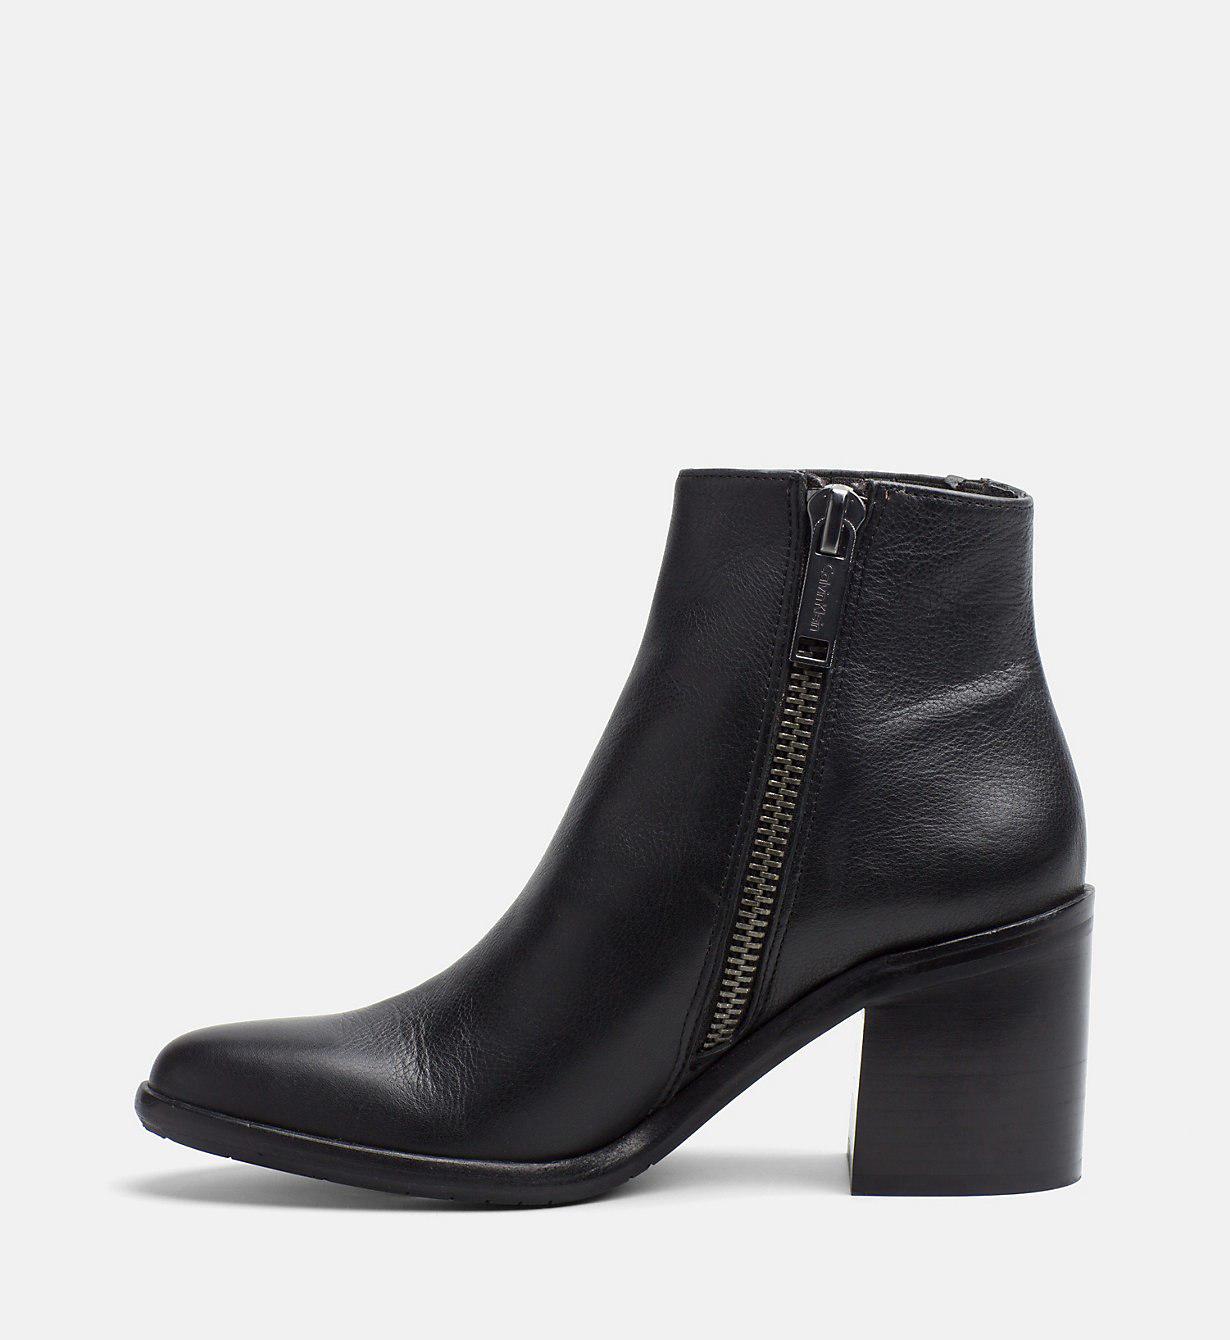 Calvin Klein Leather Zip Ankle Boots in Black - Lyst